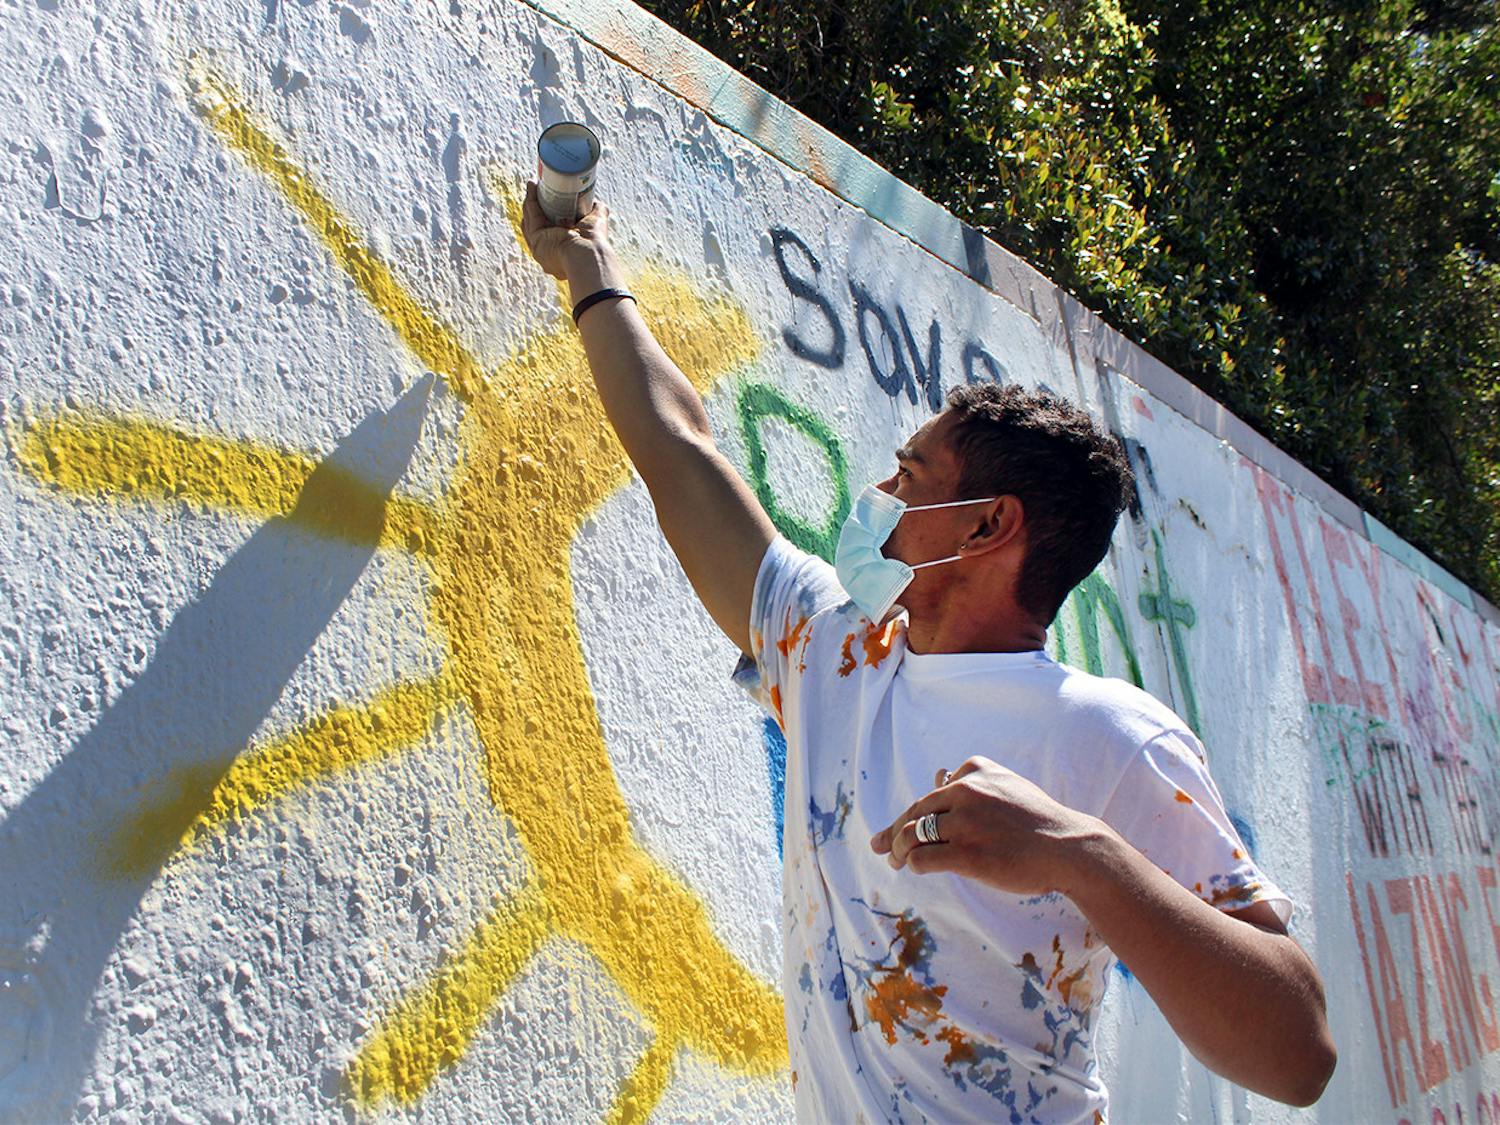 Oscar Santiago, 18, a political science freshman, finishes spray painting a sun on a mural that reads "Save our Bright Futures" on Sunday, March 7, 2021. The mural was painted in response to Senate Bill 86, which would limit some students’ access to state funding, including the Bright Futures scholarship.